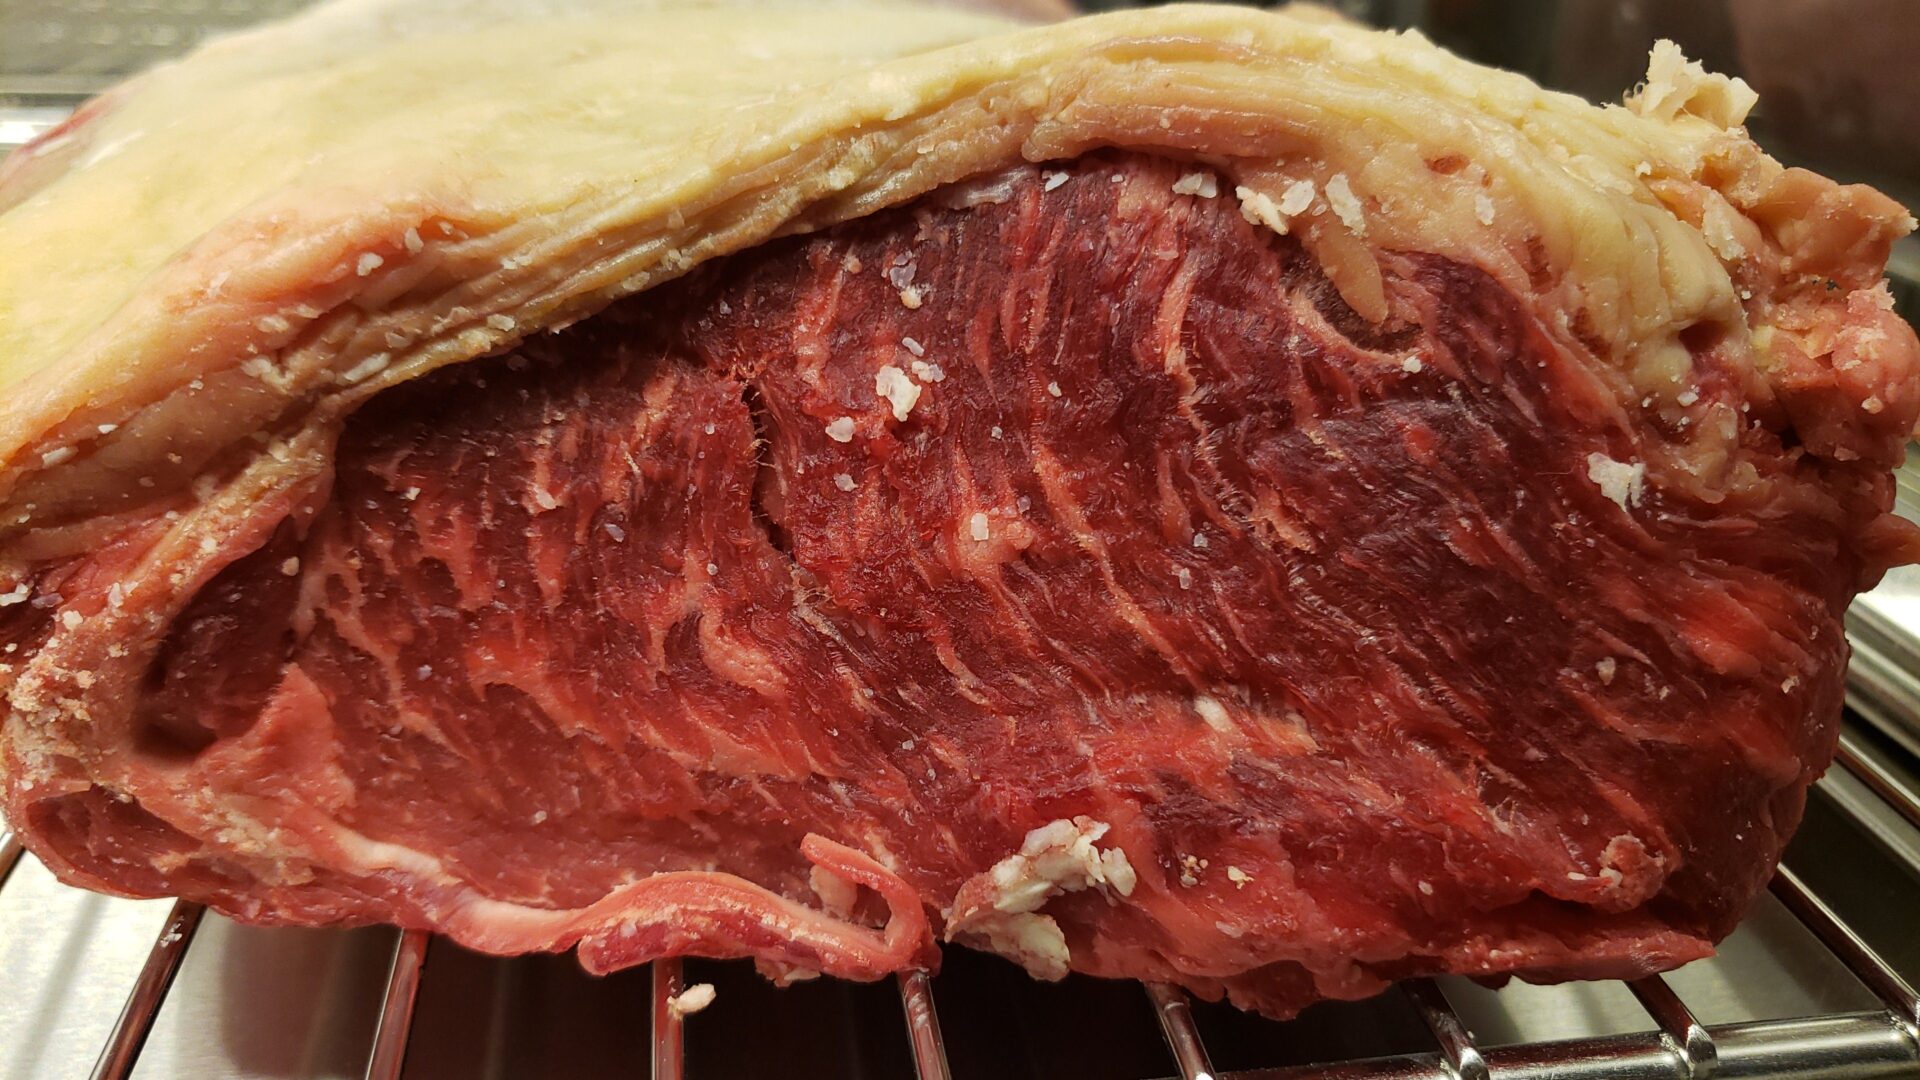 A close up of the meat on the grill